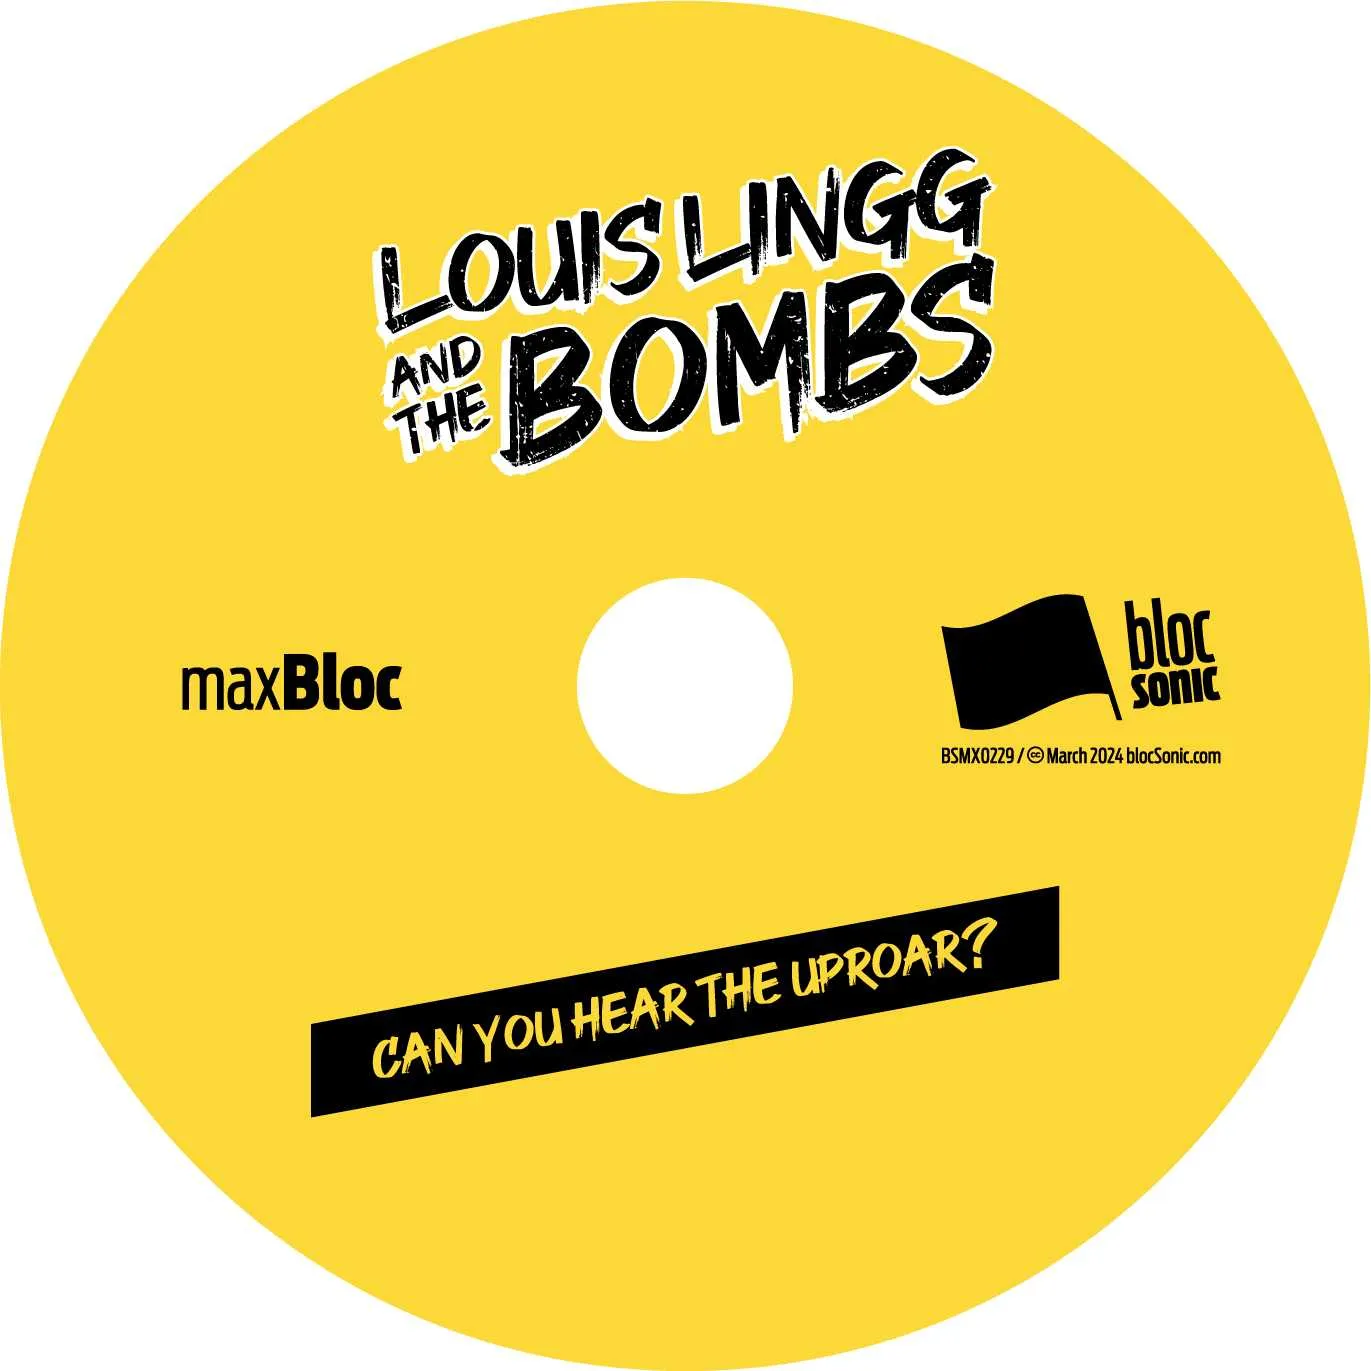 Album disc for “Can You Hear The Uproar?” by Louis Lingg and The Bombs